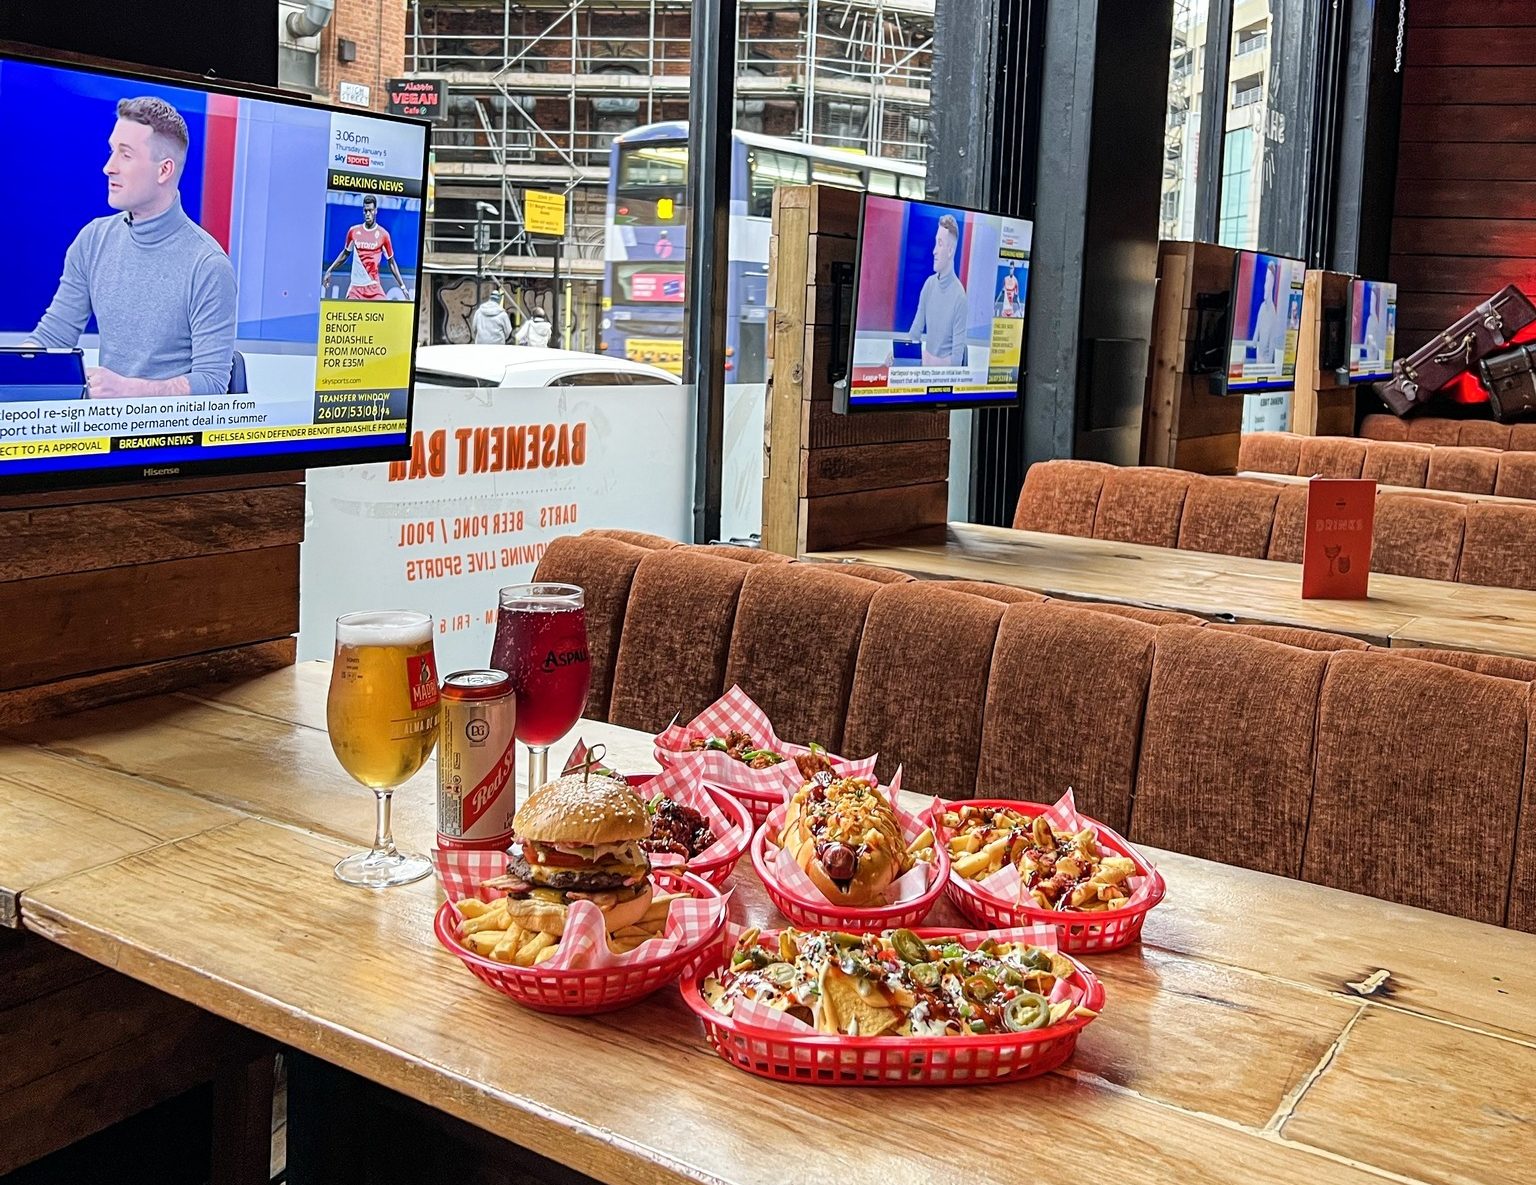 shack-manchester-food-on-table-tv-screens